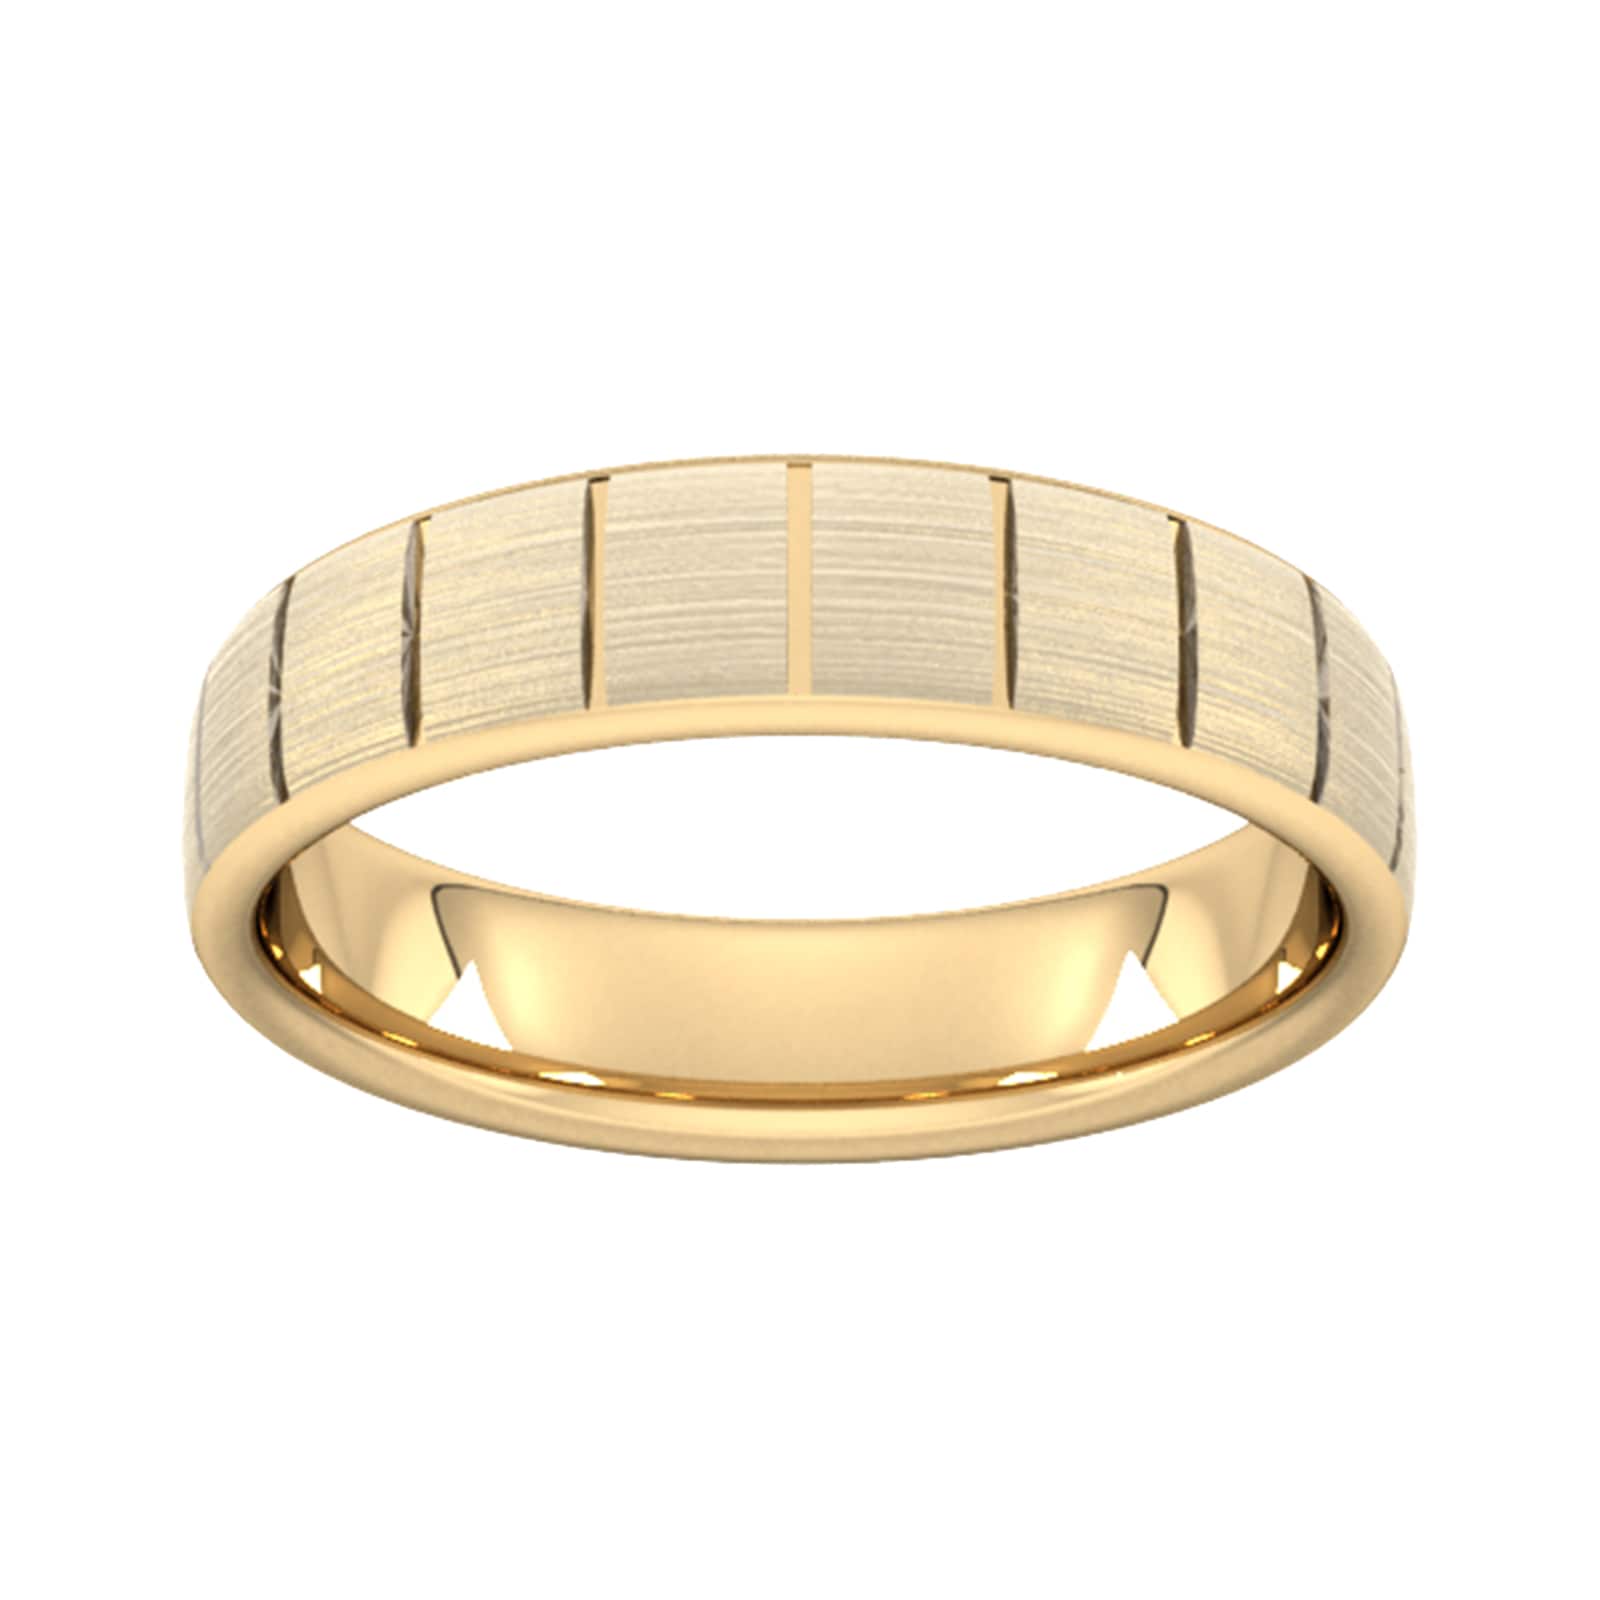 5mm Slight Court Heavy Vertical Lines Wedding Ring In 9 Carat Yellow Gold - Ring Size G